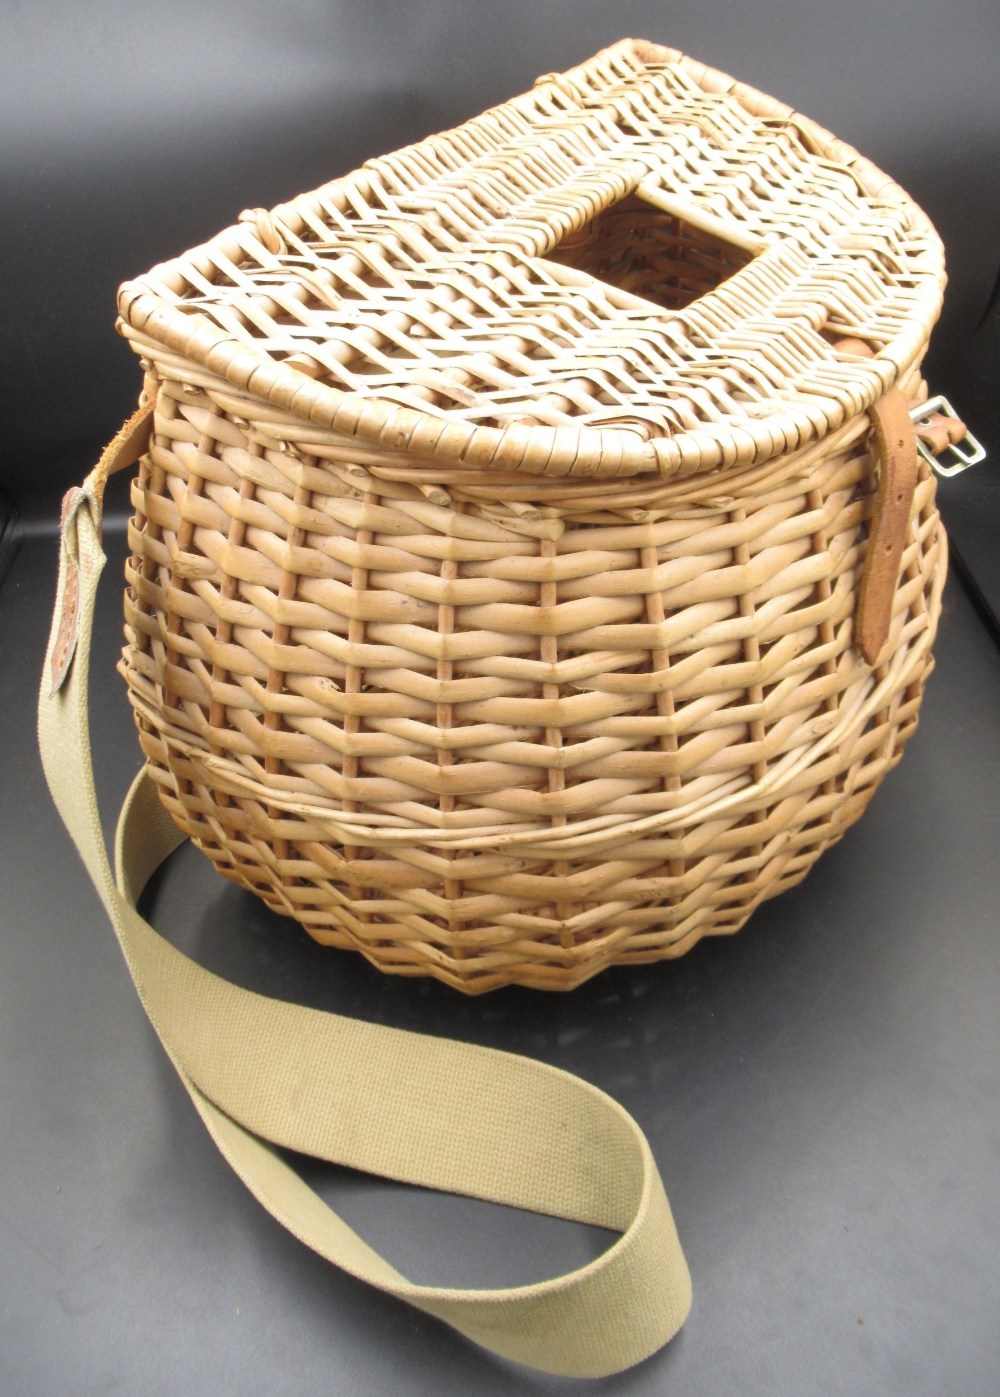 Vintage wicker fly-fishing basket in excellent condition, with leather fasteners and a canvas